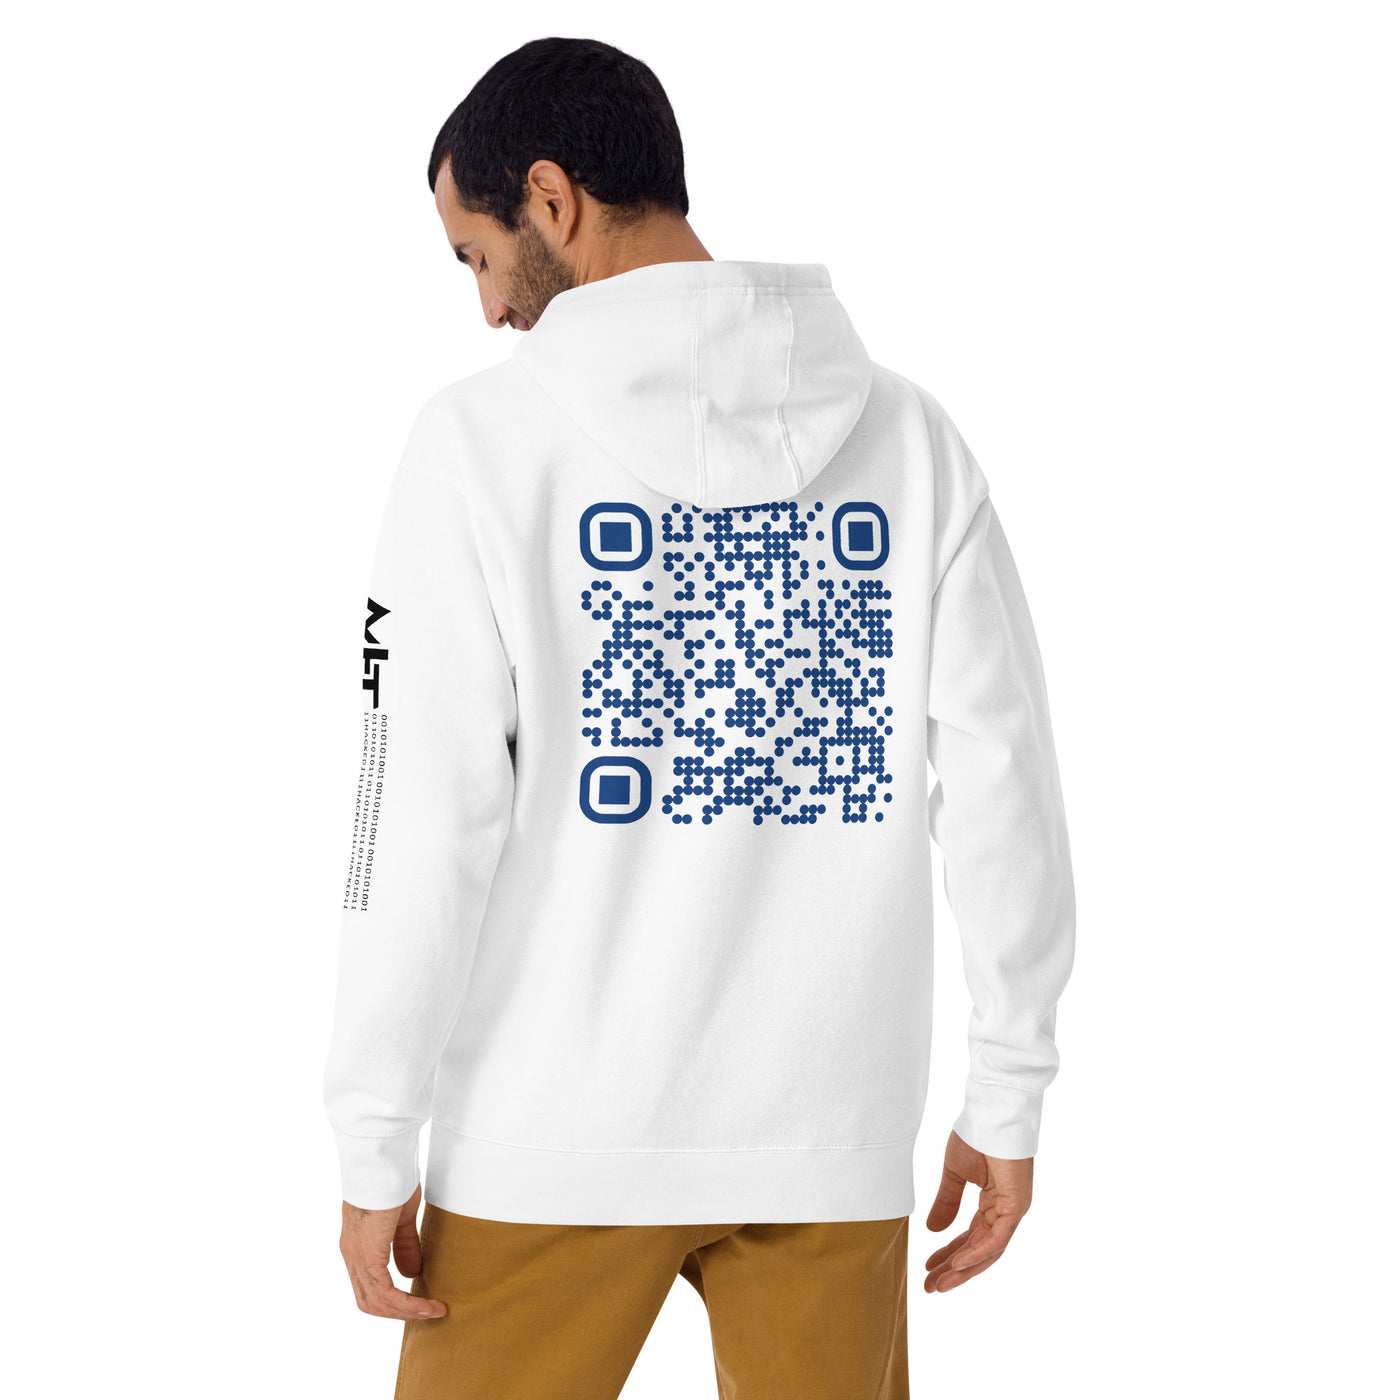 Who's the New Kid, Hacker, Developer, Gamer, Crypto King (Blue Cyber) - Unisex Hoodie Personalized QR Code